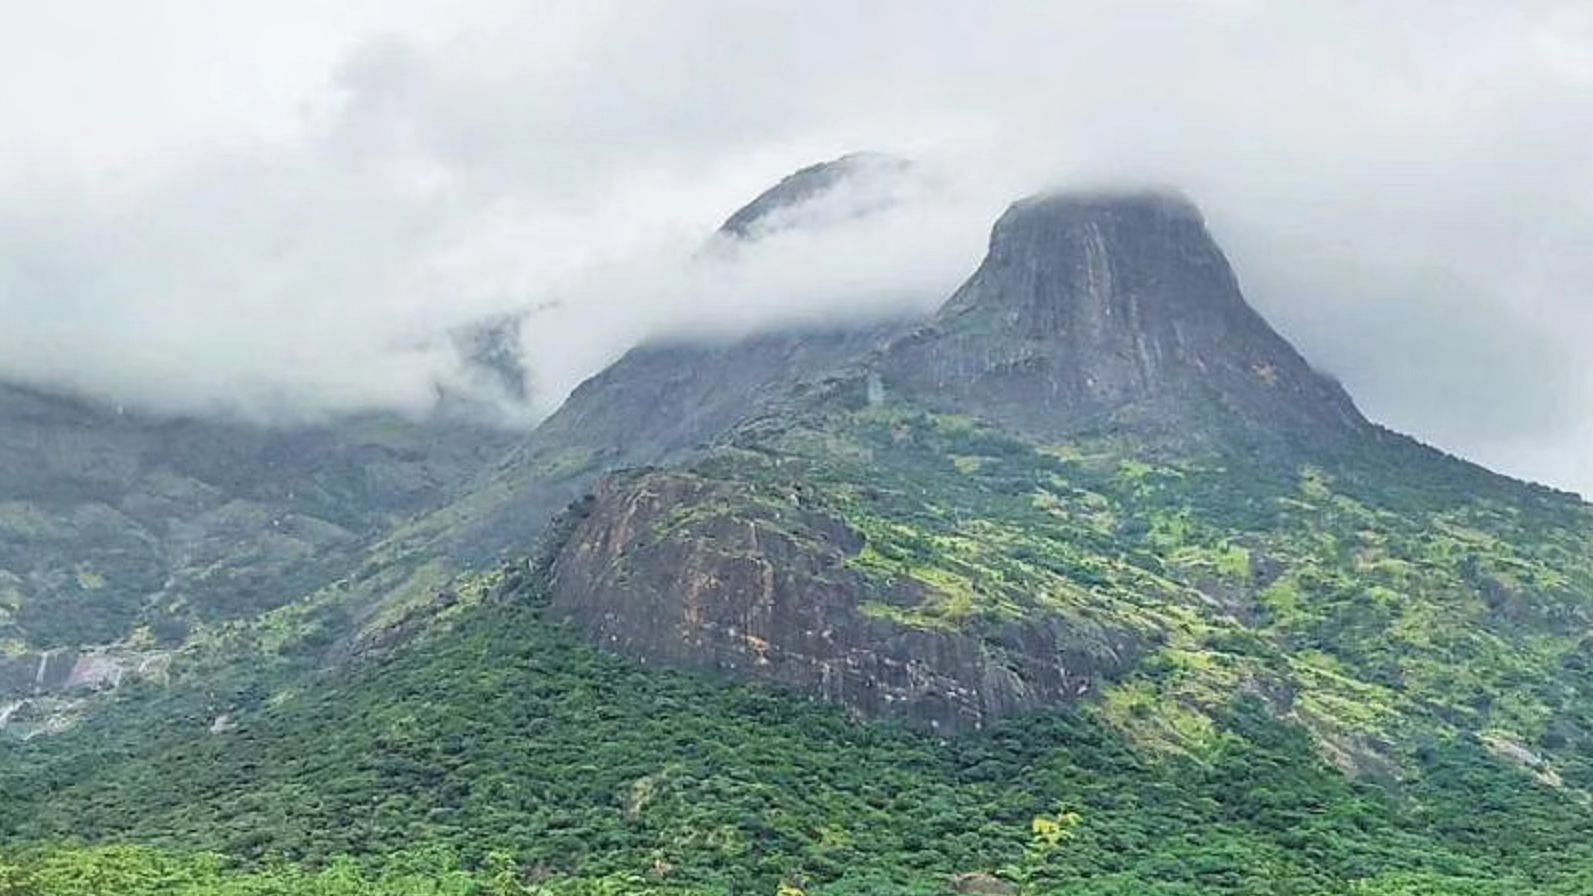 <div class="paragraphs"><p>The project site lies in Pottipuram village in the Theni district of Tamil Nadu, about 4.9 kilometers from Mathikettan-Periyar tiger corridor and falls within the Bodi Hills West Reserve Forest.</p></div>